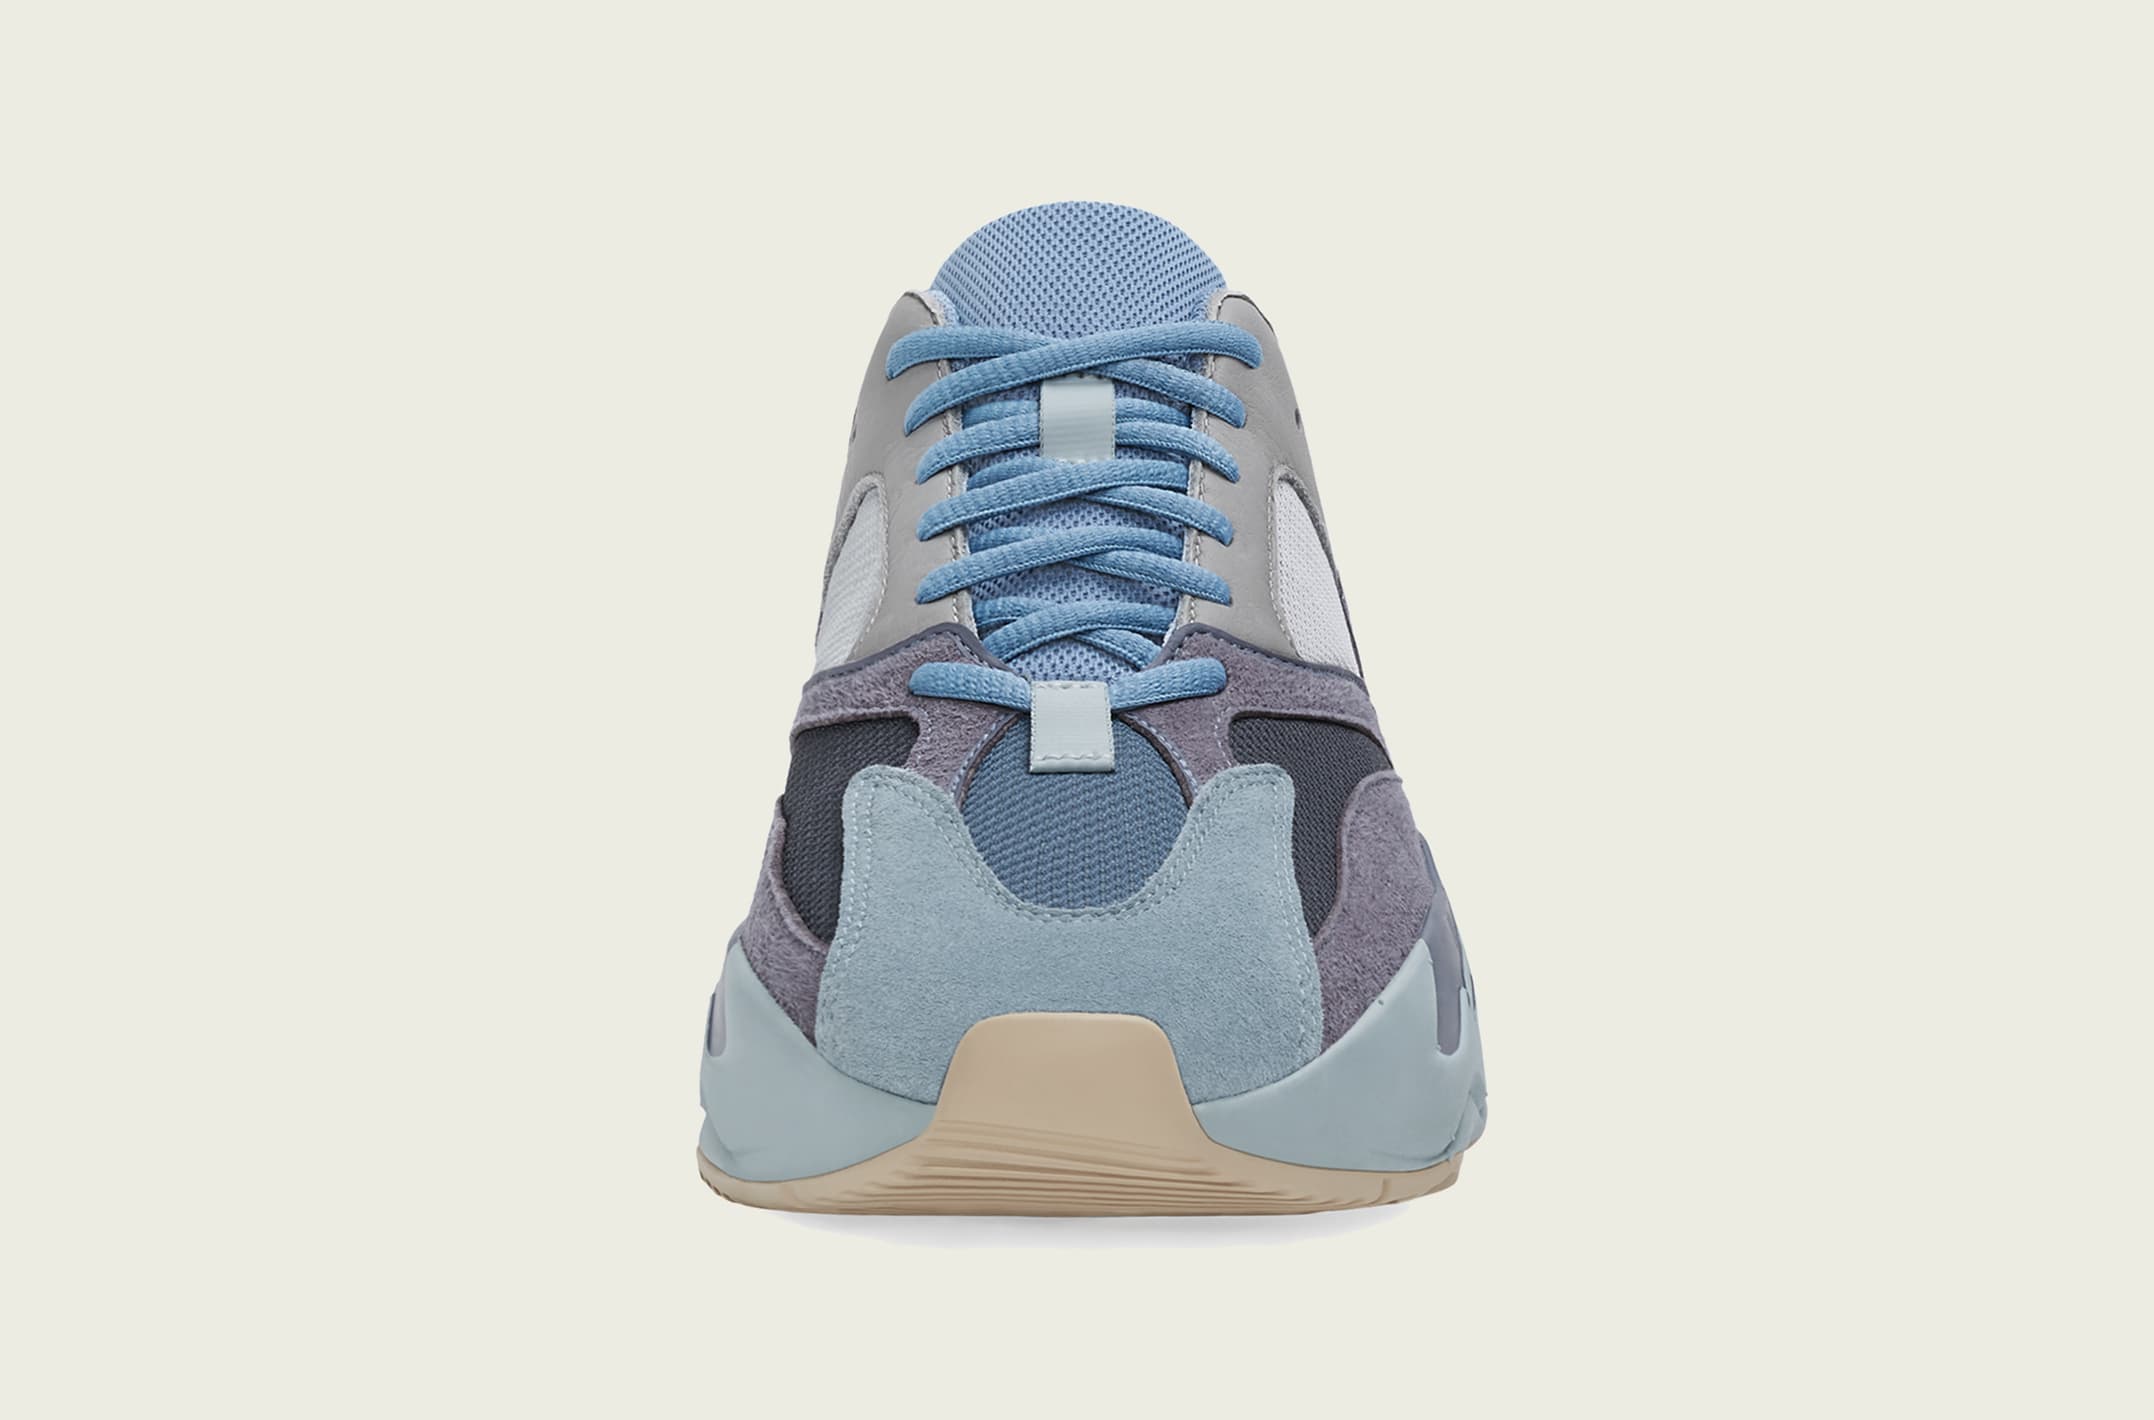 Adidas Yeezy Boost 700 'Carbon Blue' Release Date | Sole Collector